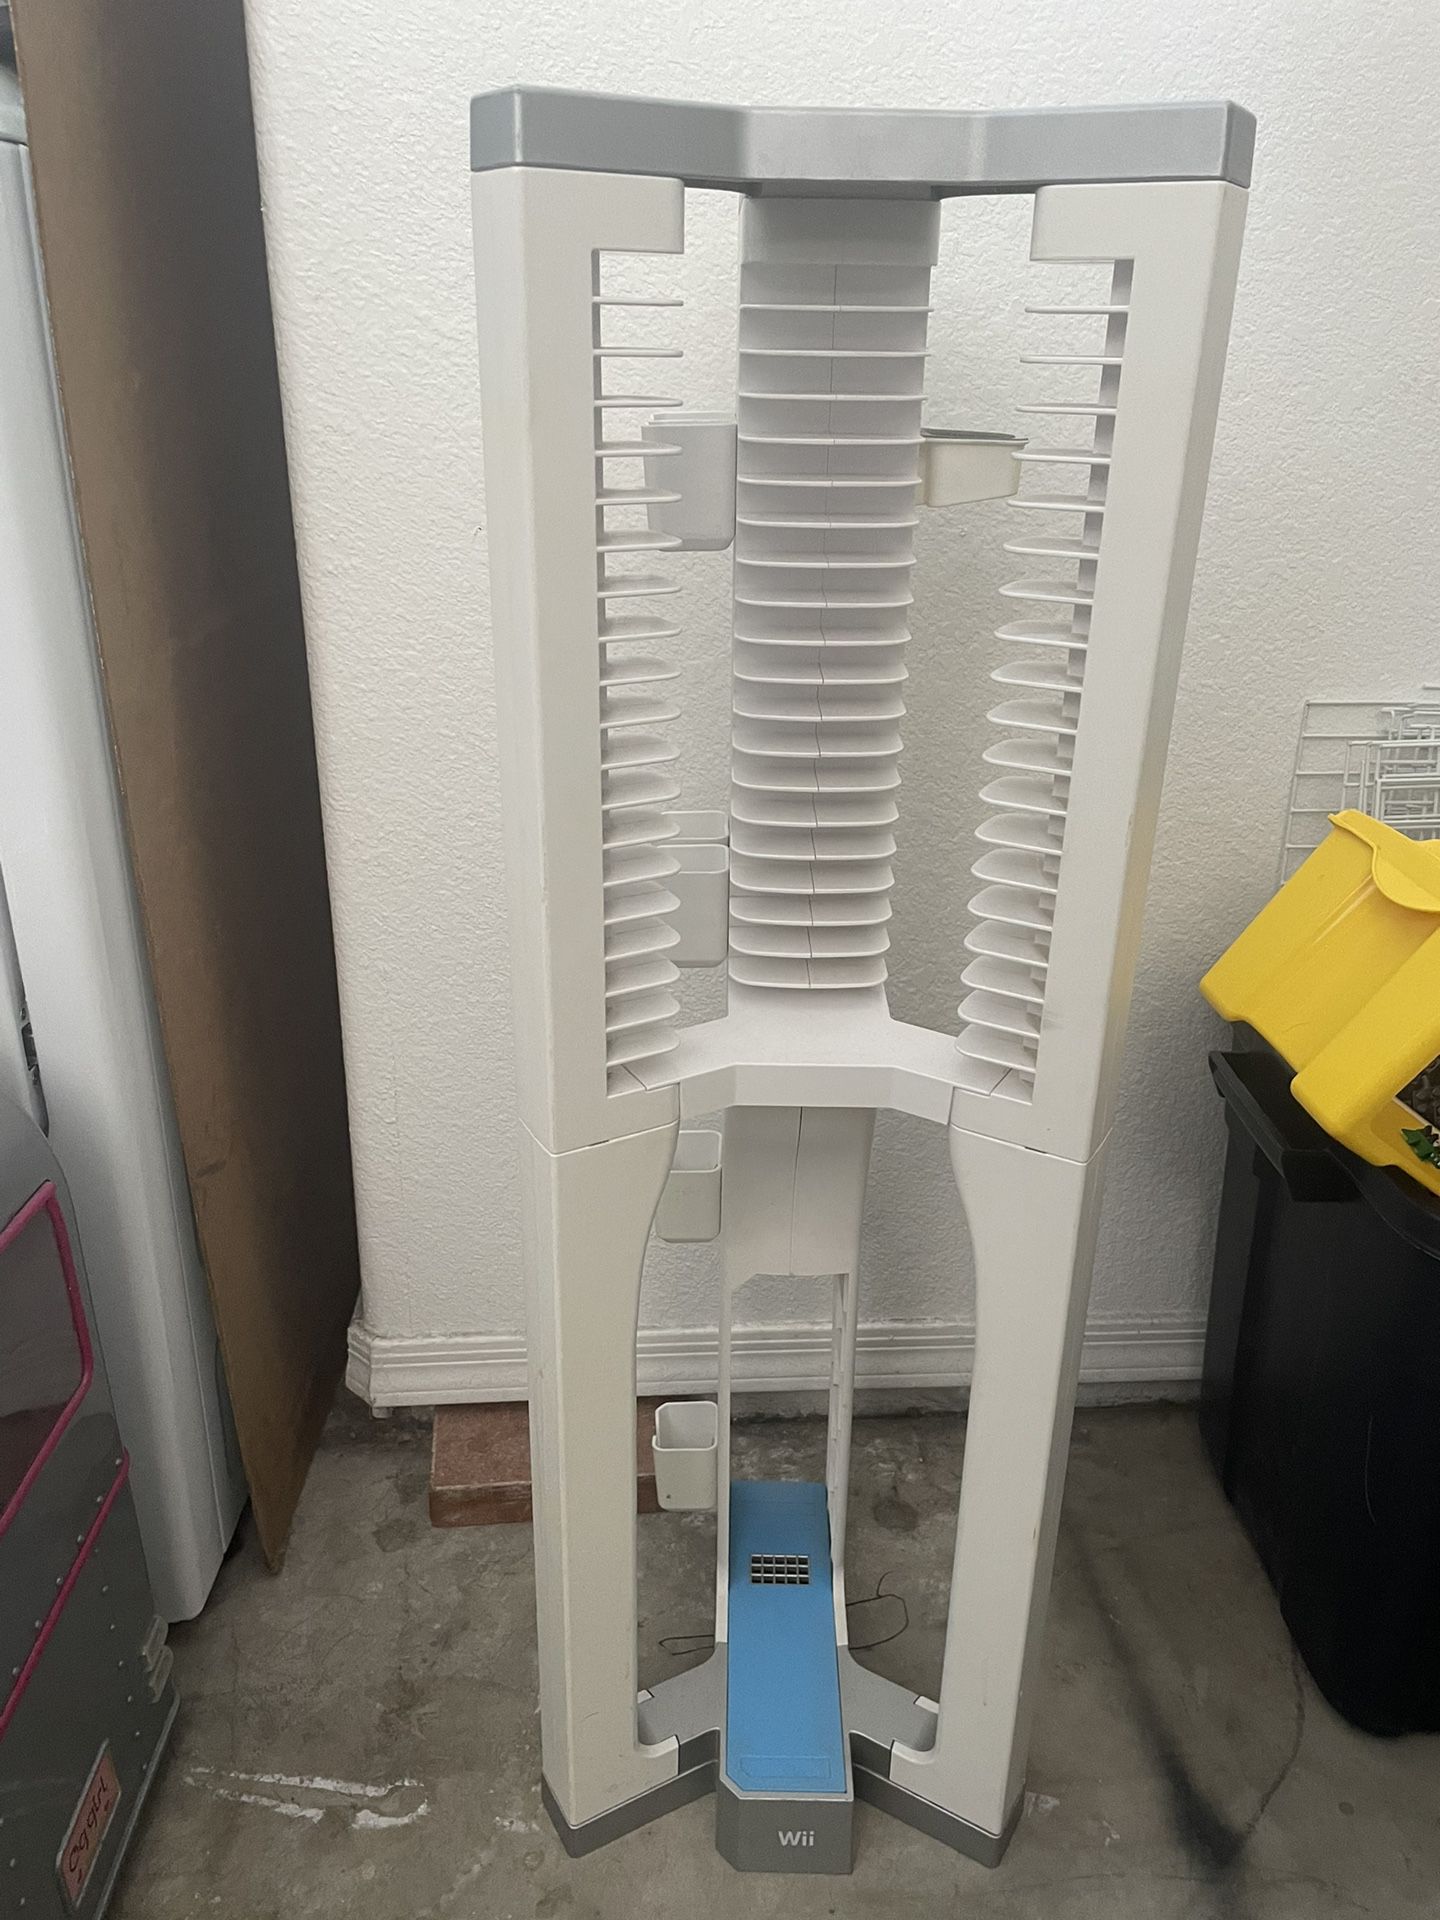 Nintendo Wii Game And Accessories Tower